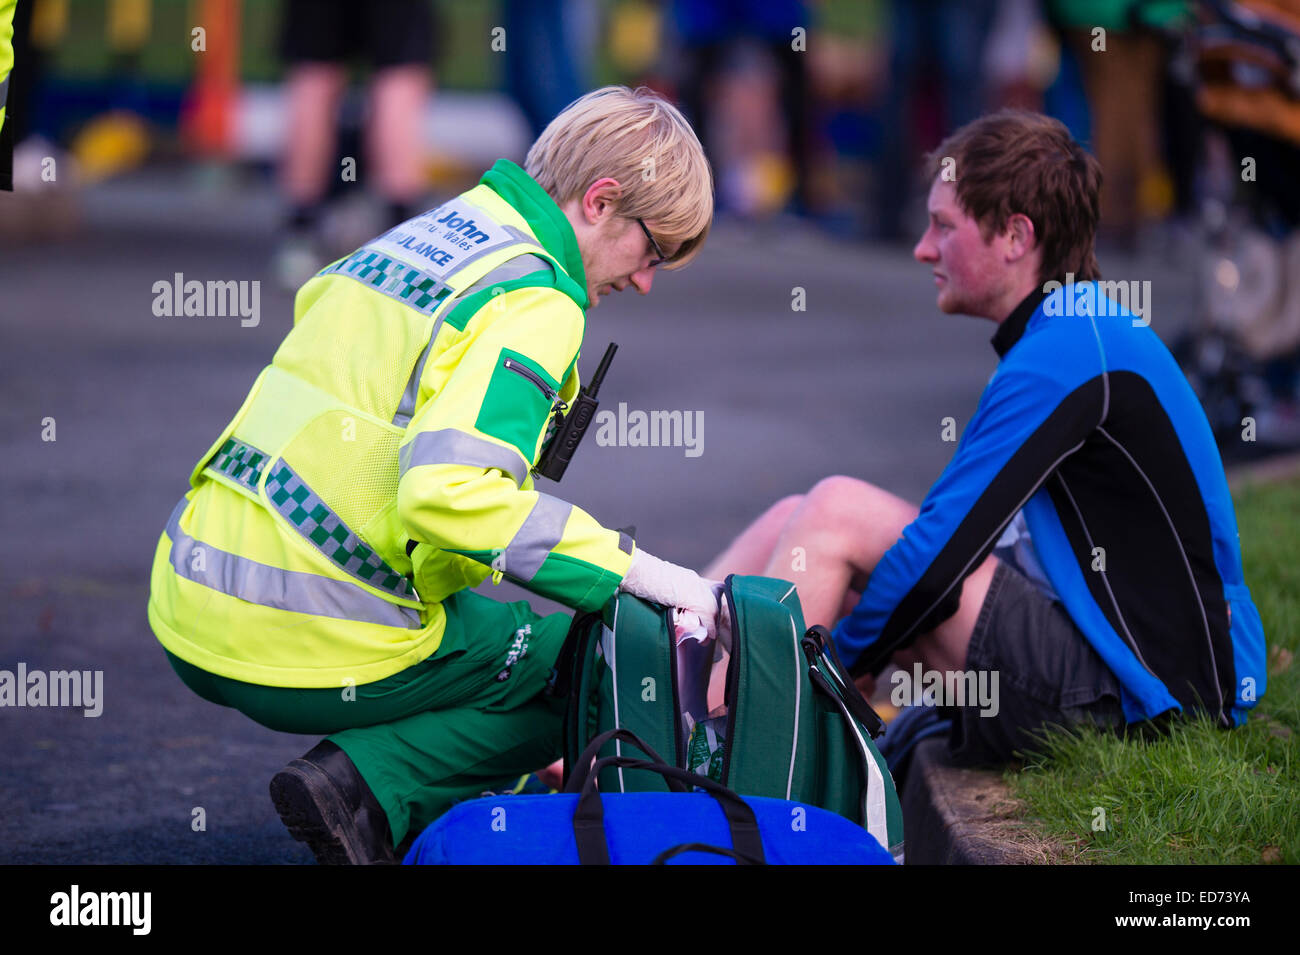 A uniformed  St John Ambulance Wales volunteer first aider  attending to an injured young man person runner at the end of a 10k charity road race, UK Stock Photo